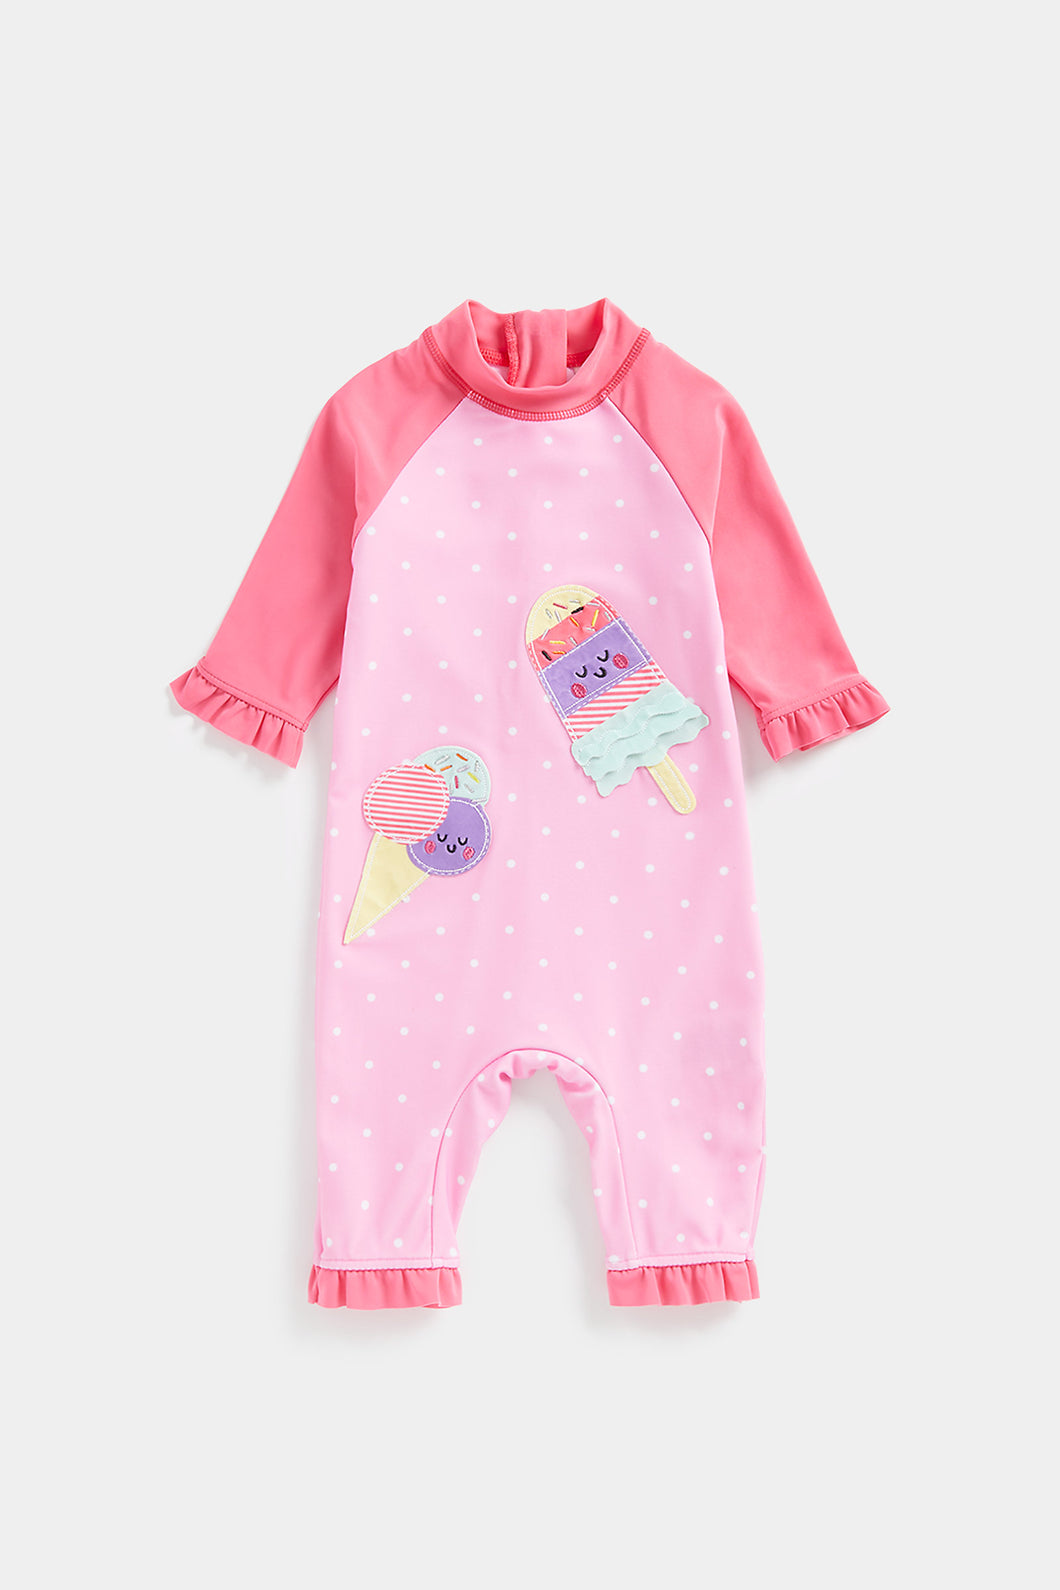 Mothercare Ice Lolly Swim Suit